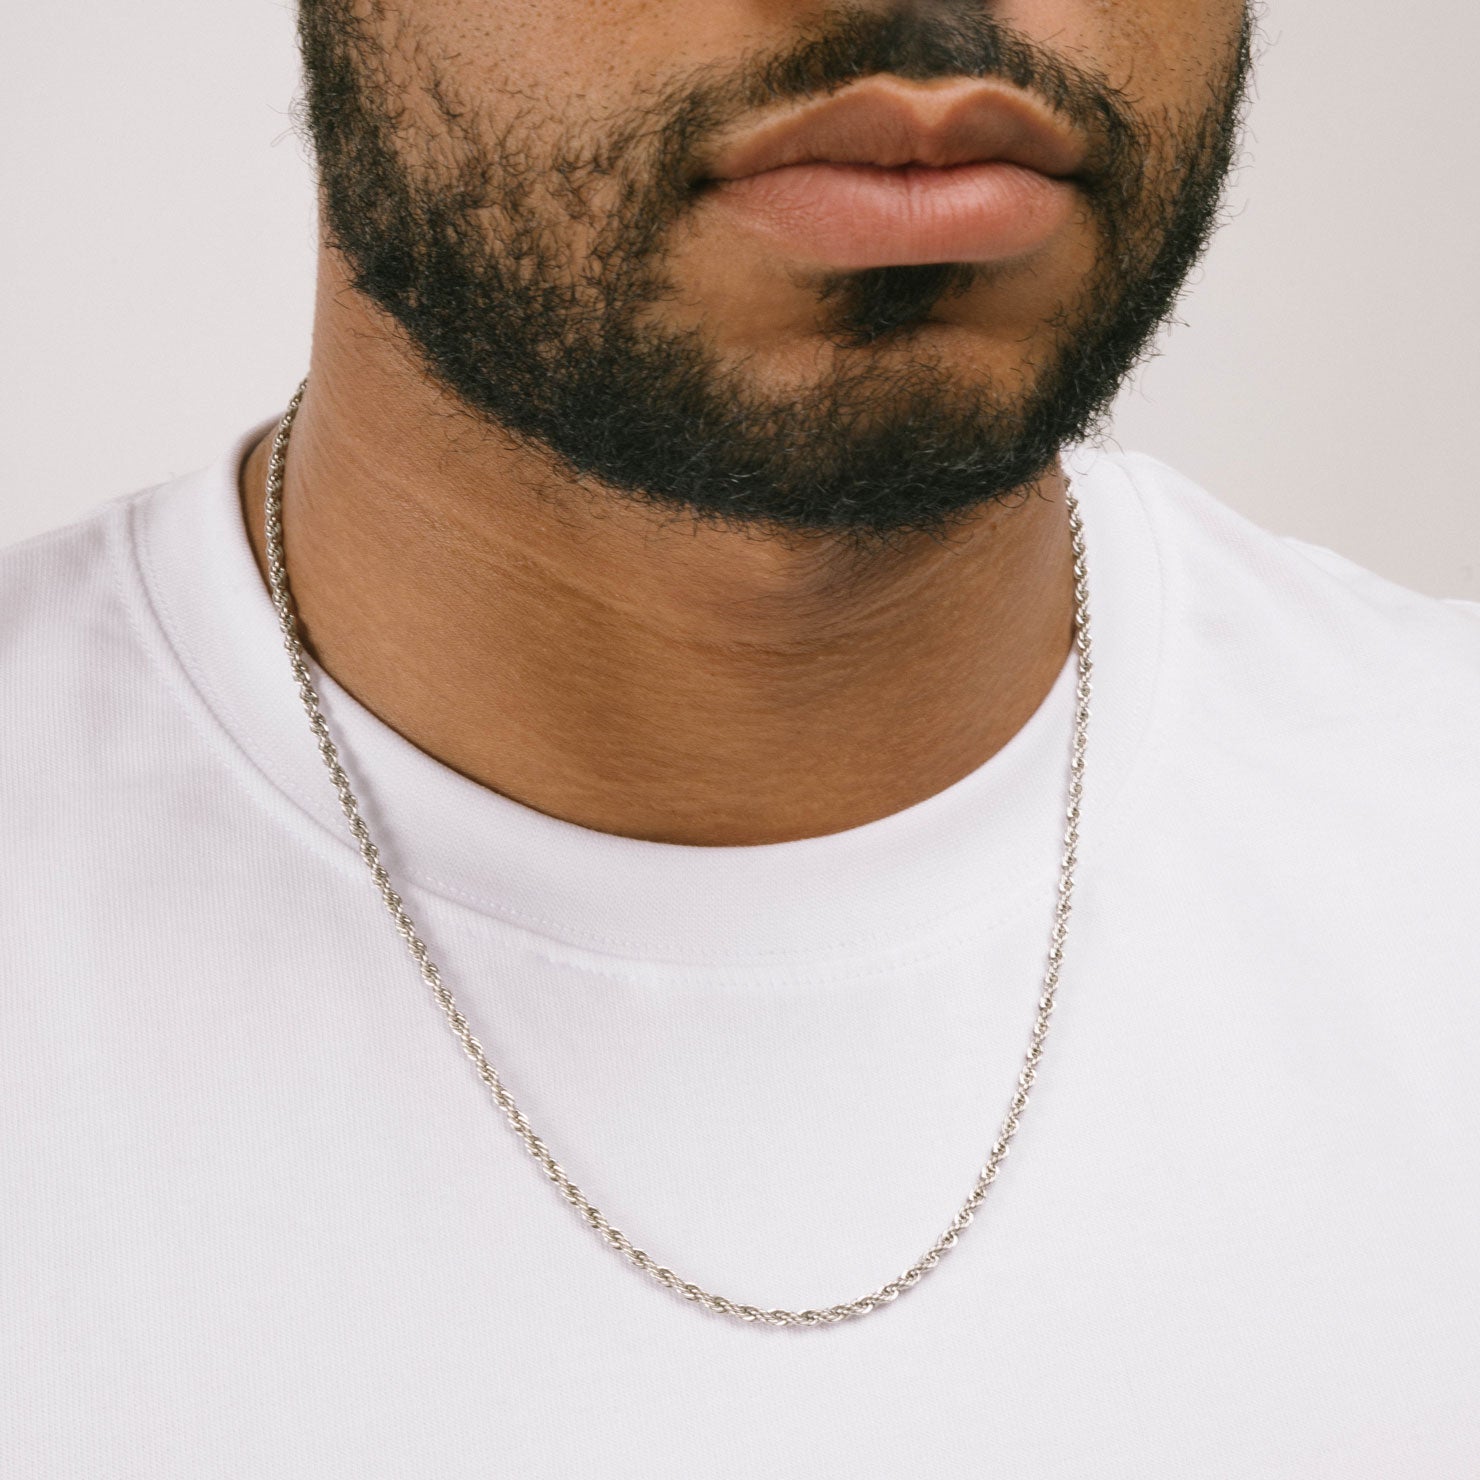 A model wearing the Twisted Rope Chain in Silver is crafted from durable stainless steel. It measures 45cm, 50cm, or 55cm in length and 3mm in width. Additionally, it is non-tarnishing, water-resistant, and safe for those with allergies.